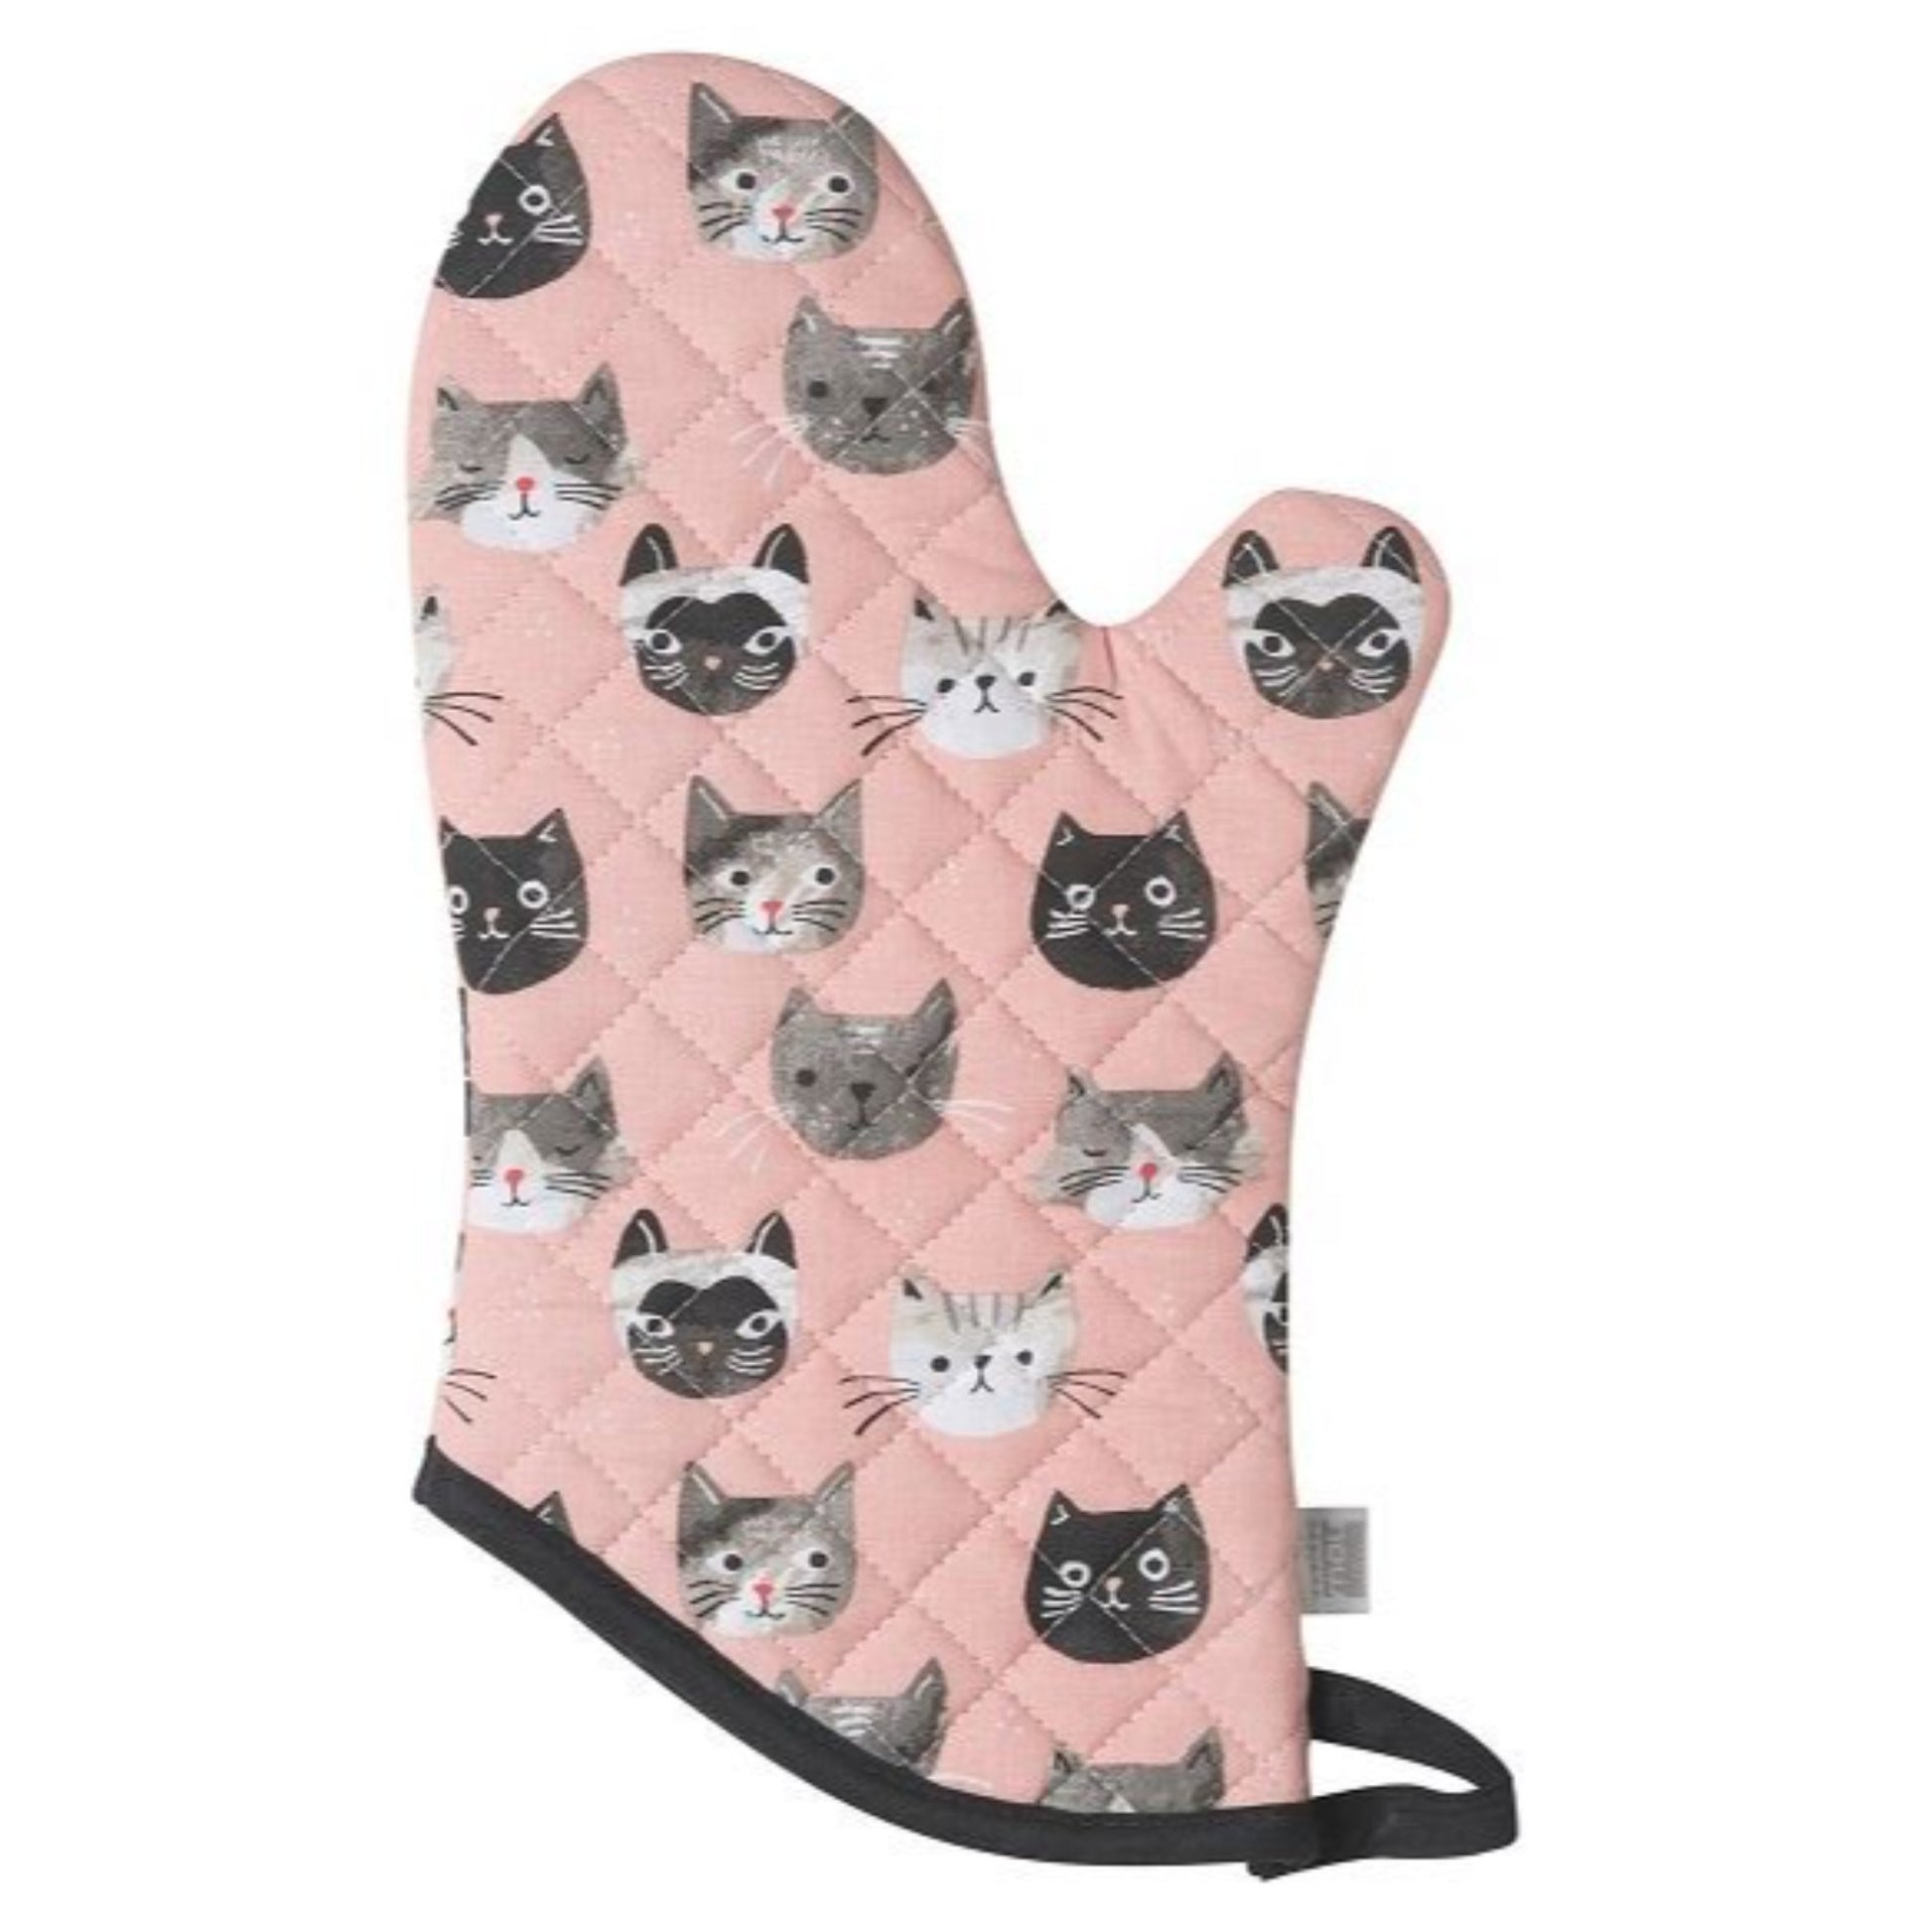 "The Cats Meow": Oven Mitts (Set of 2) - Tiny Tiger Gift Shop